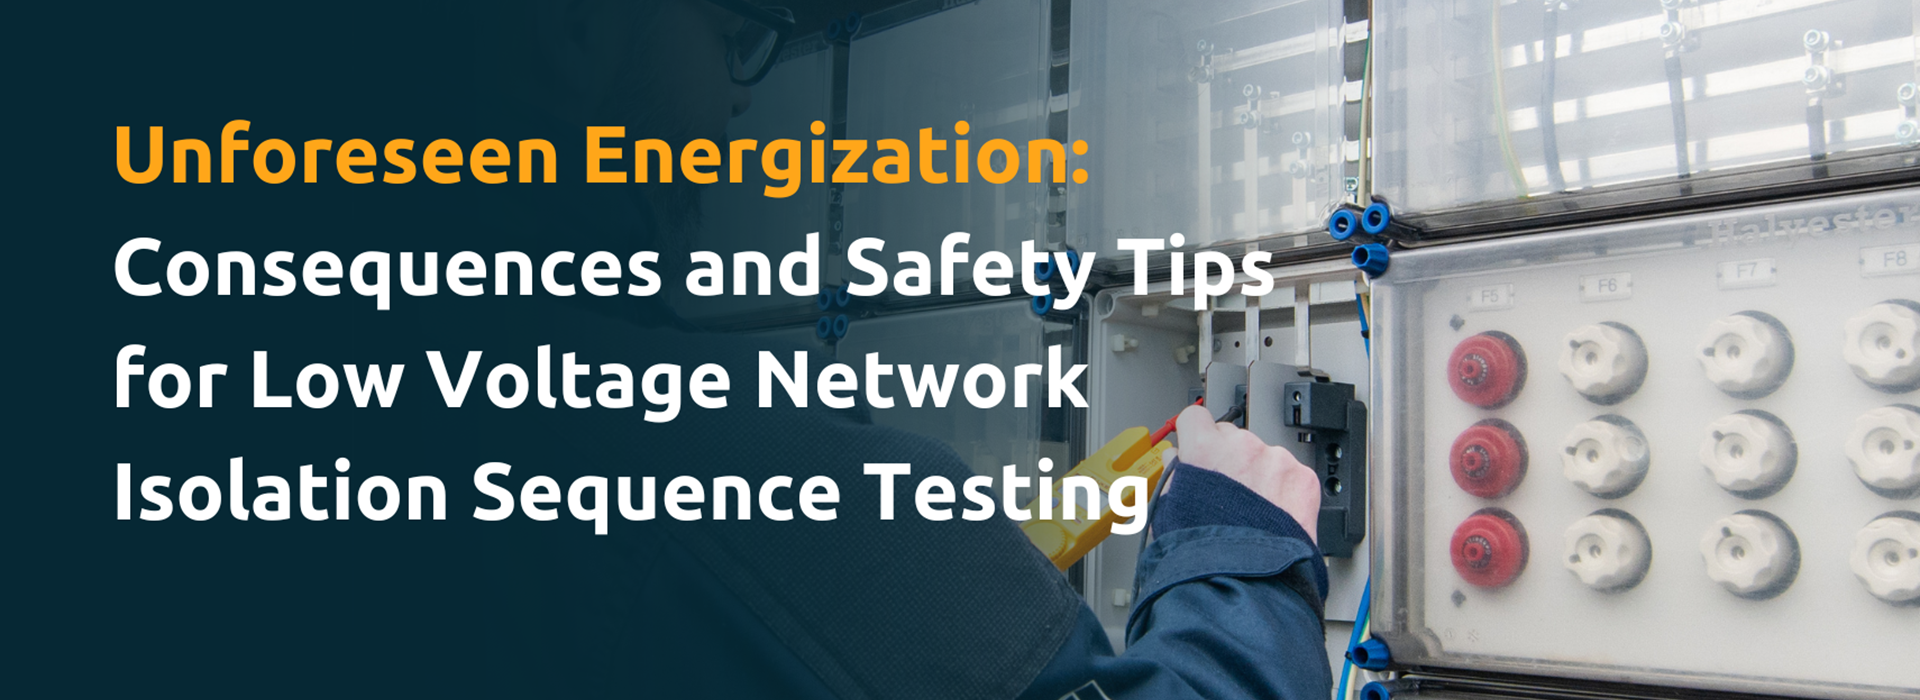 Unforseen Energization Consequences And Safety Tips Article Thumbnail